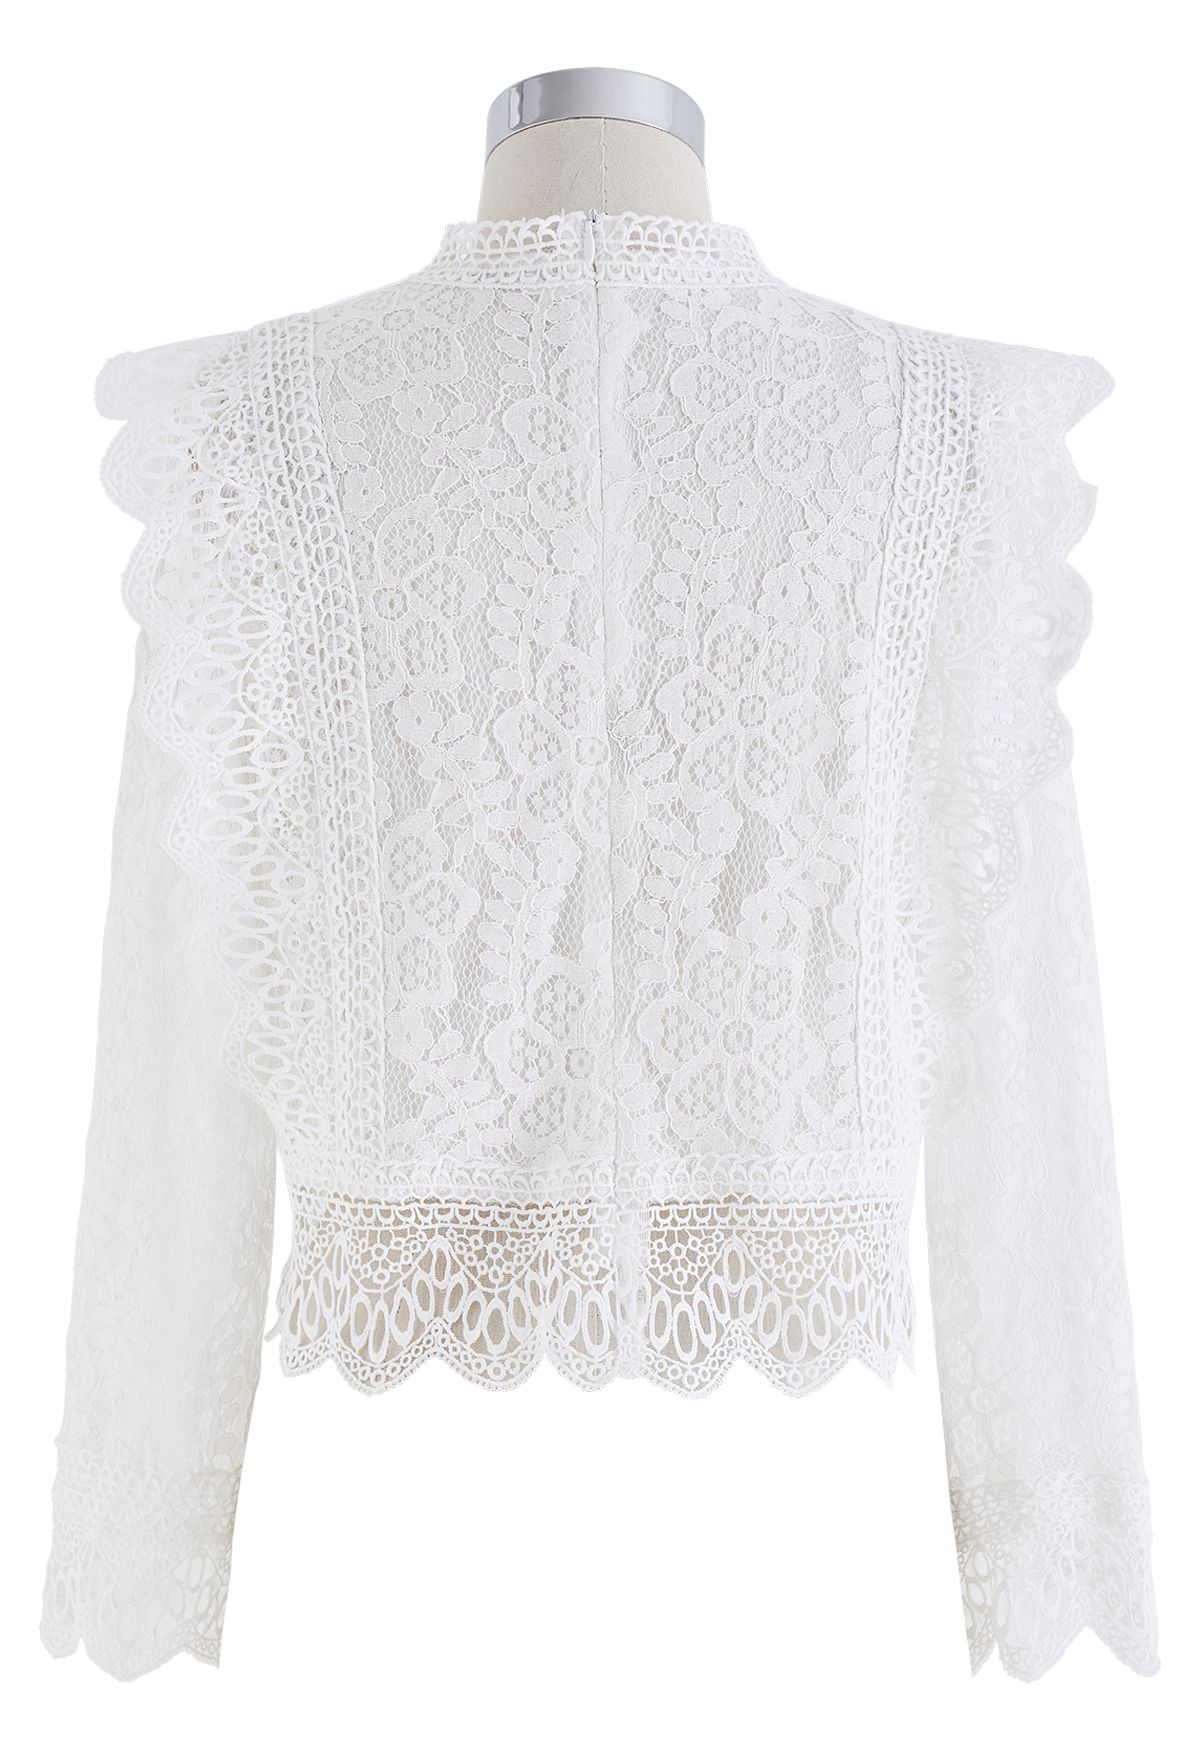 Your Sassy Start Long Sleeve Crochet Lace Top in White